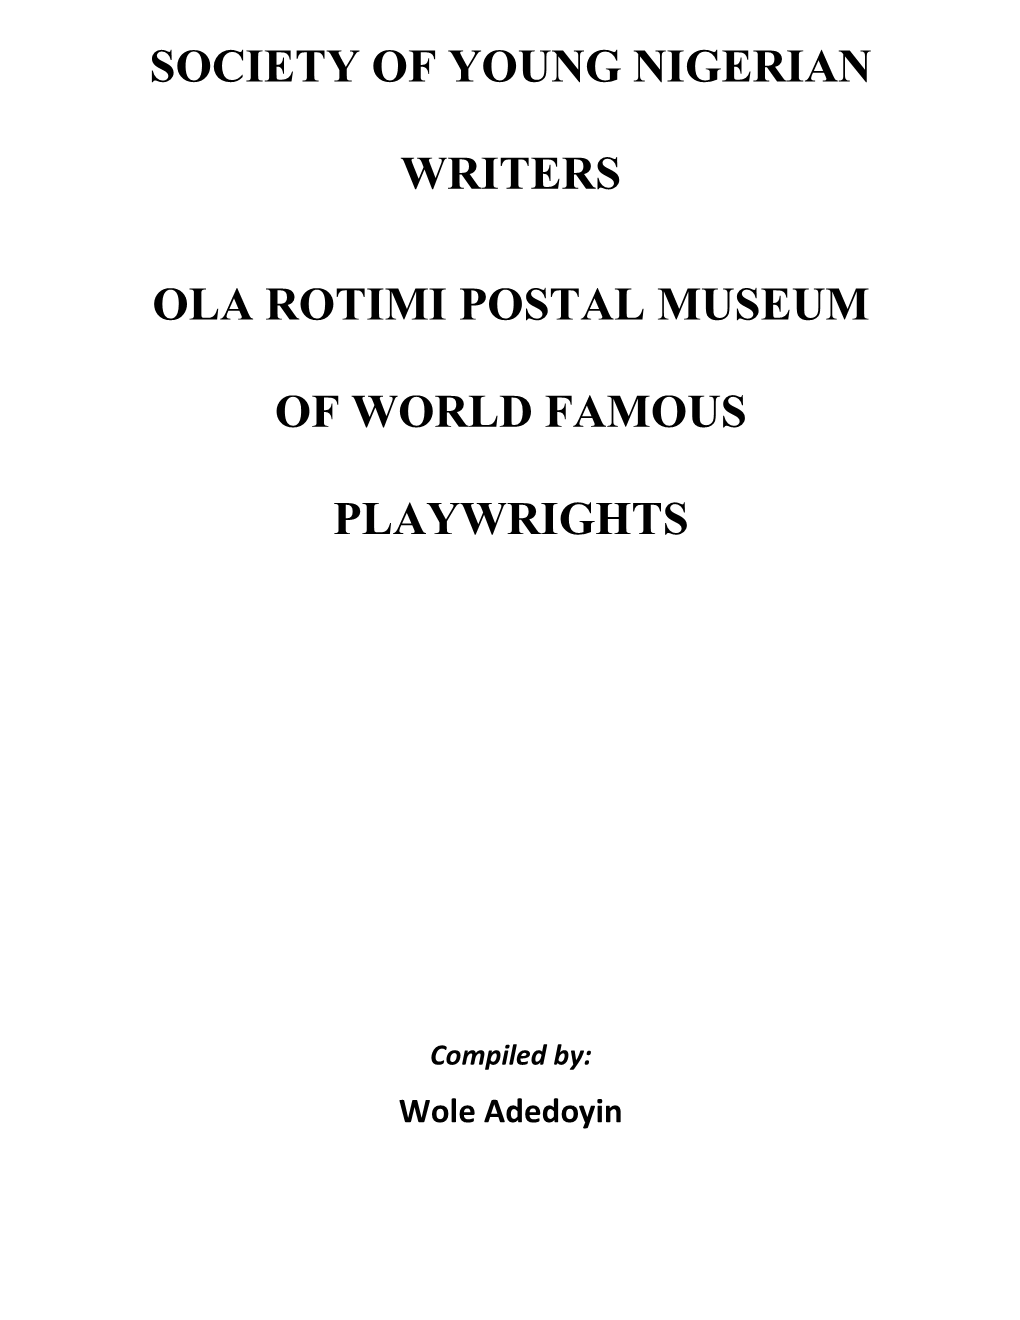 Ola Rotimi Postal Museum of World Famous Playwrights